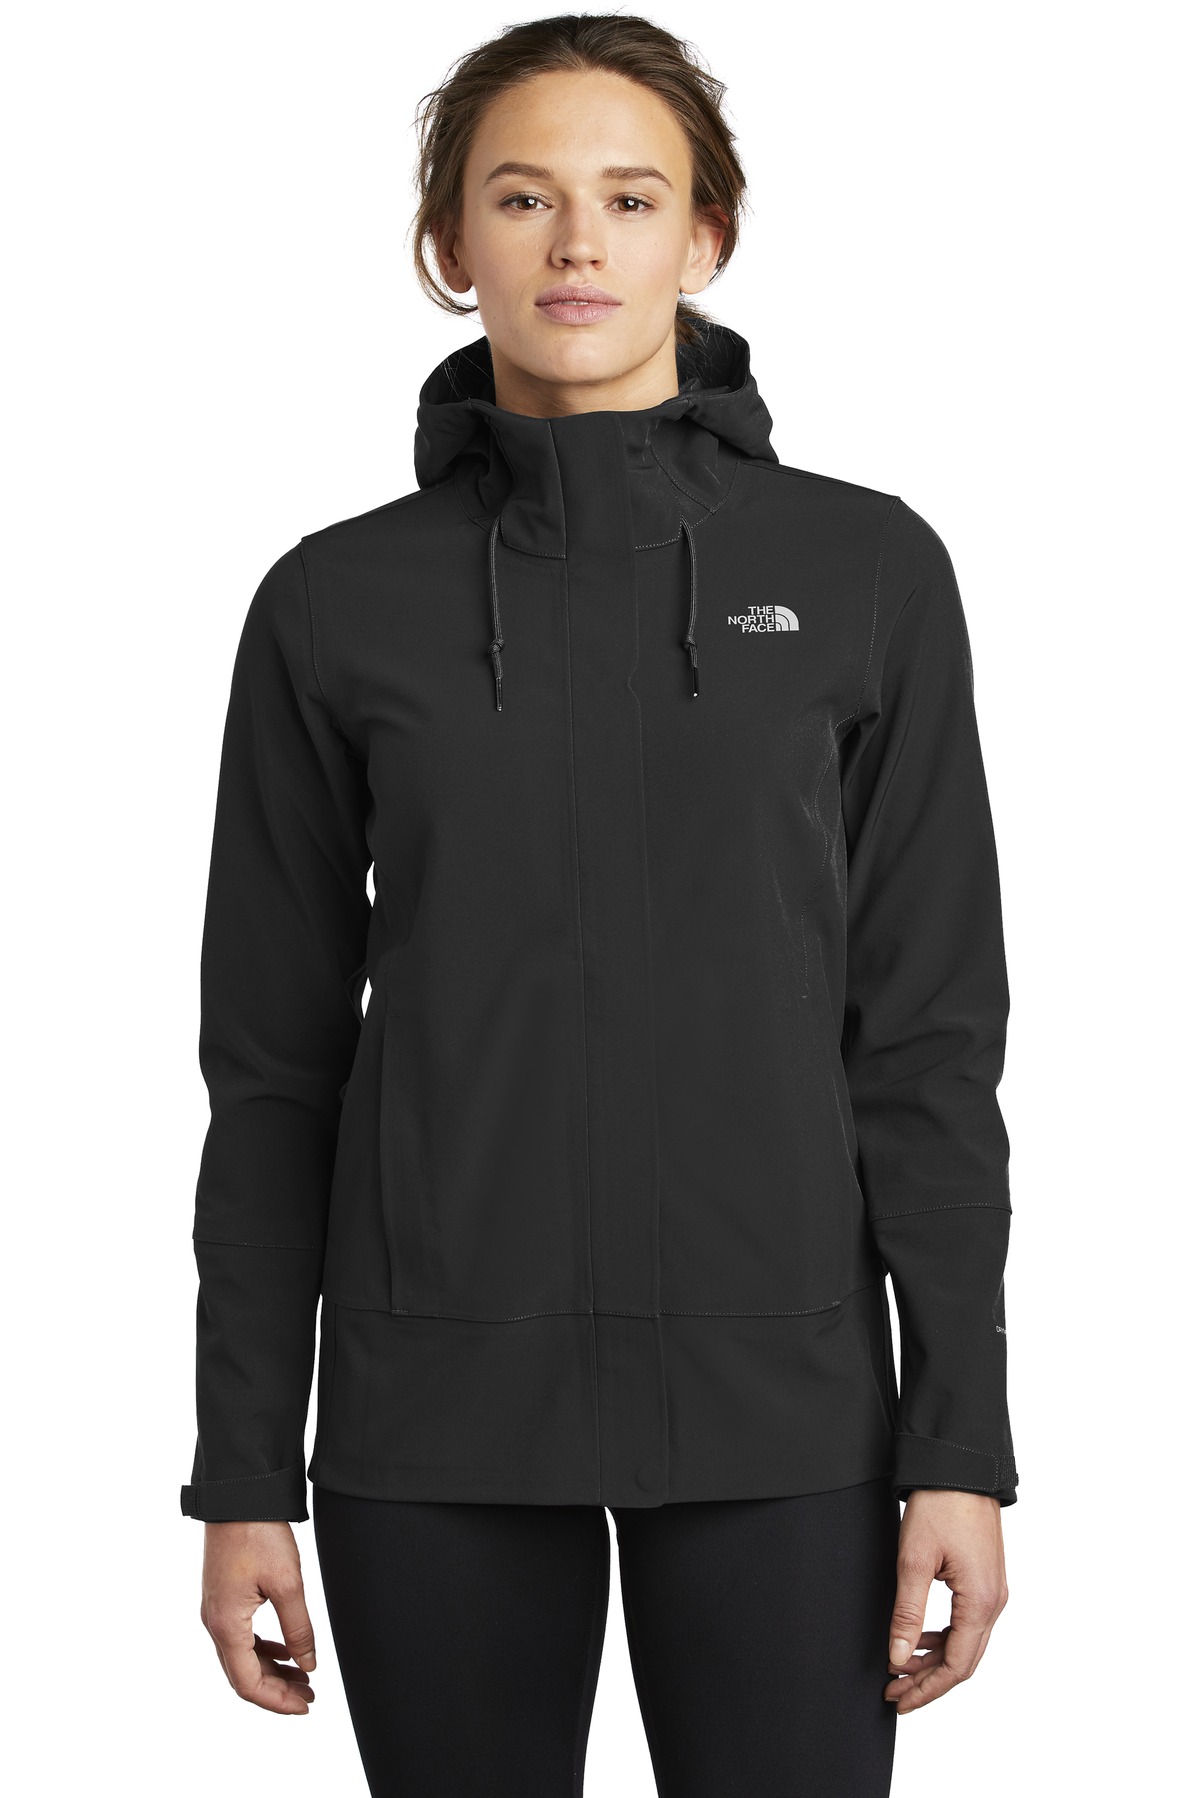 The North Face Ladies Apex DryVent Jacket-The North Face